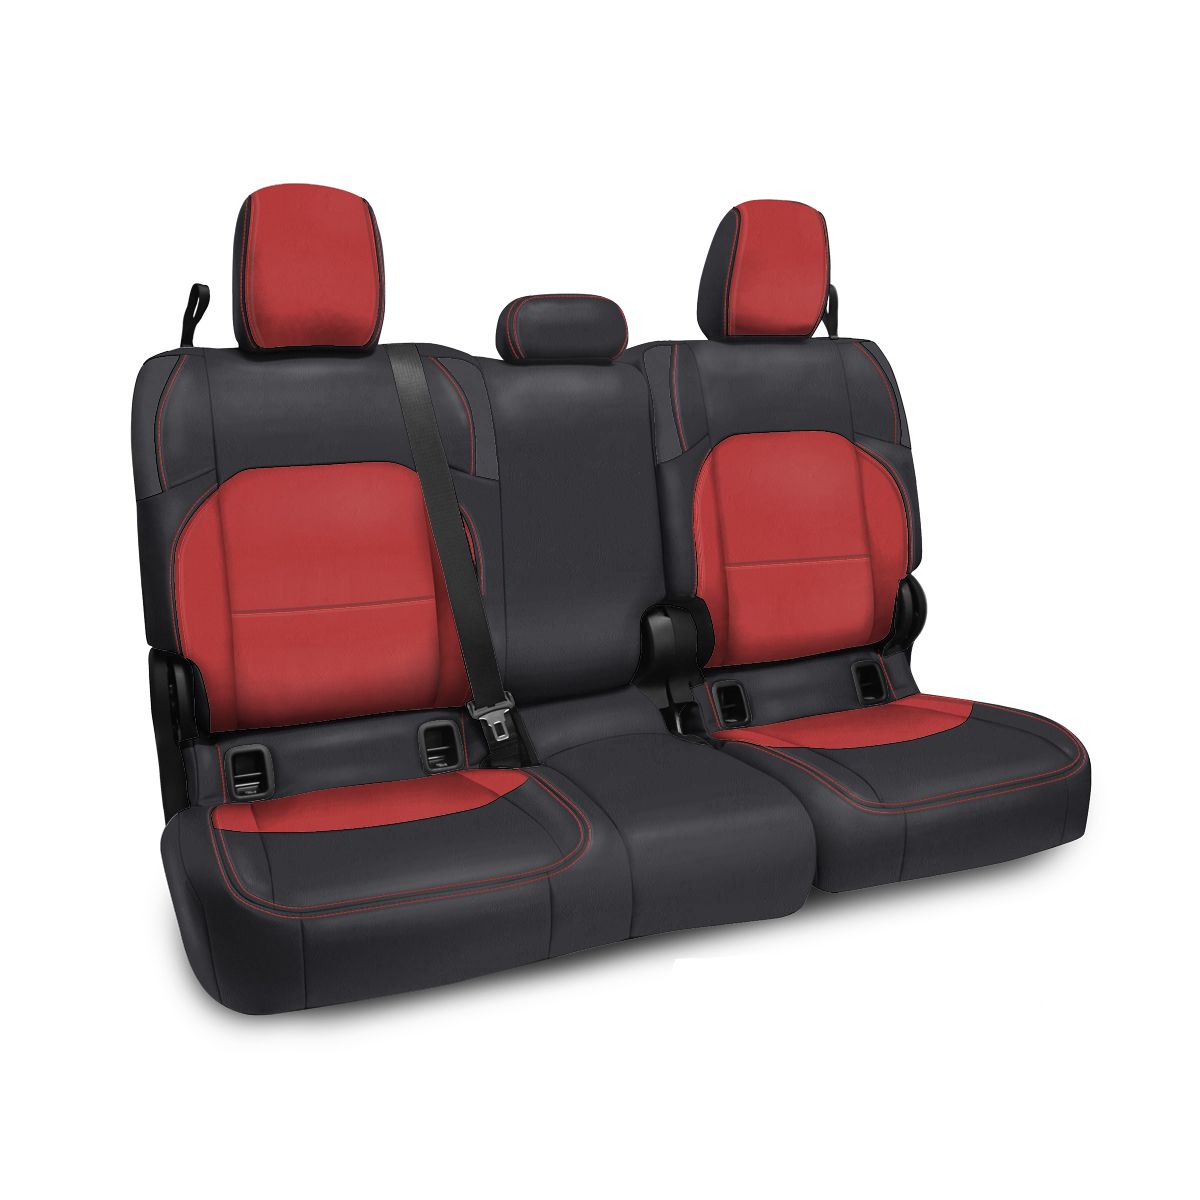 PRP 2020+ Jeep Gladiator JT Rear Bench Cover with Cloth Interior - Black/Red